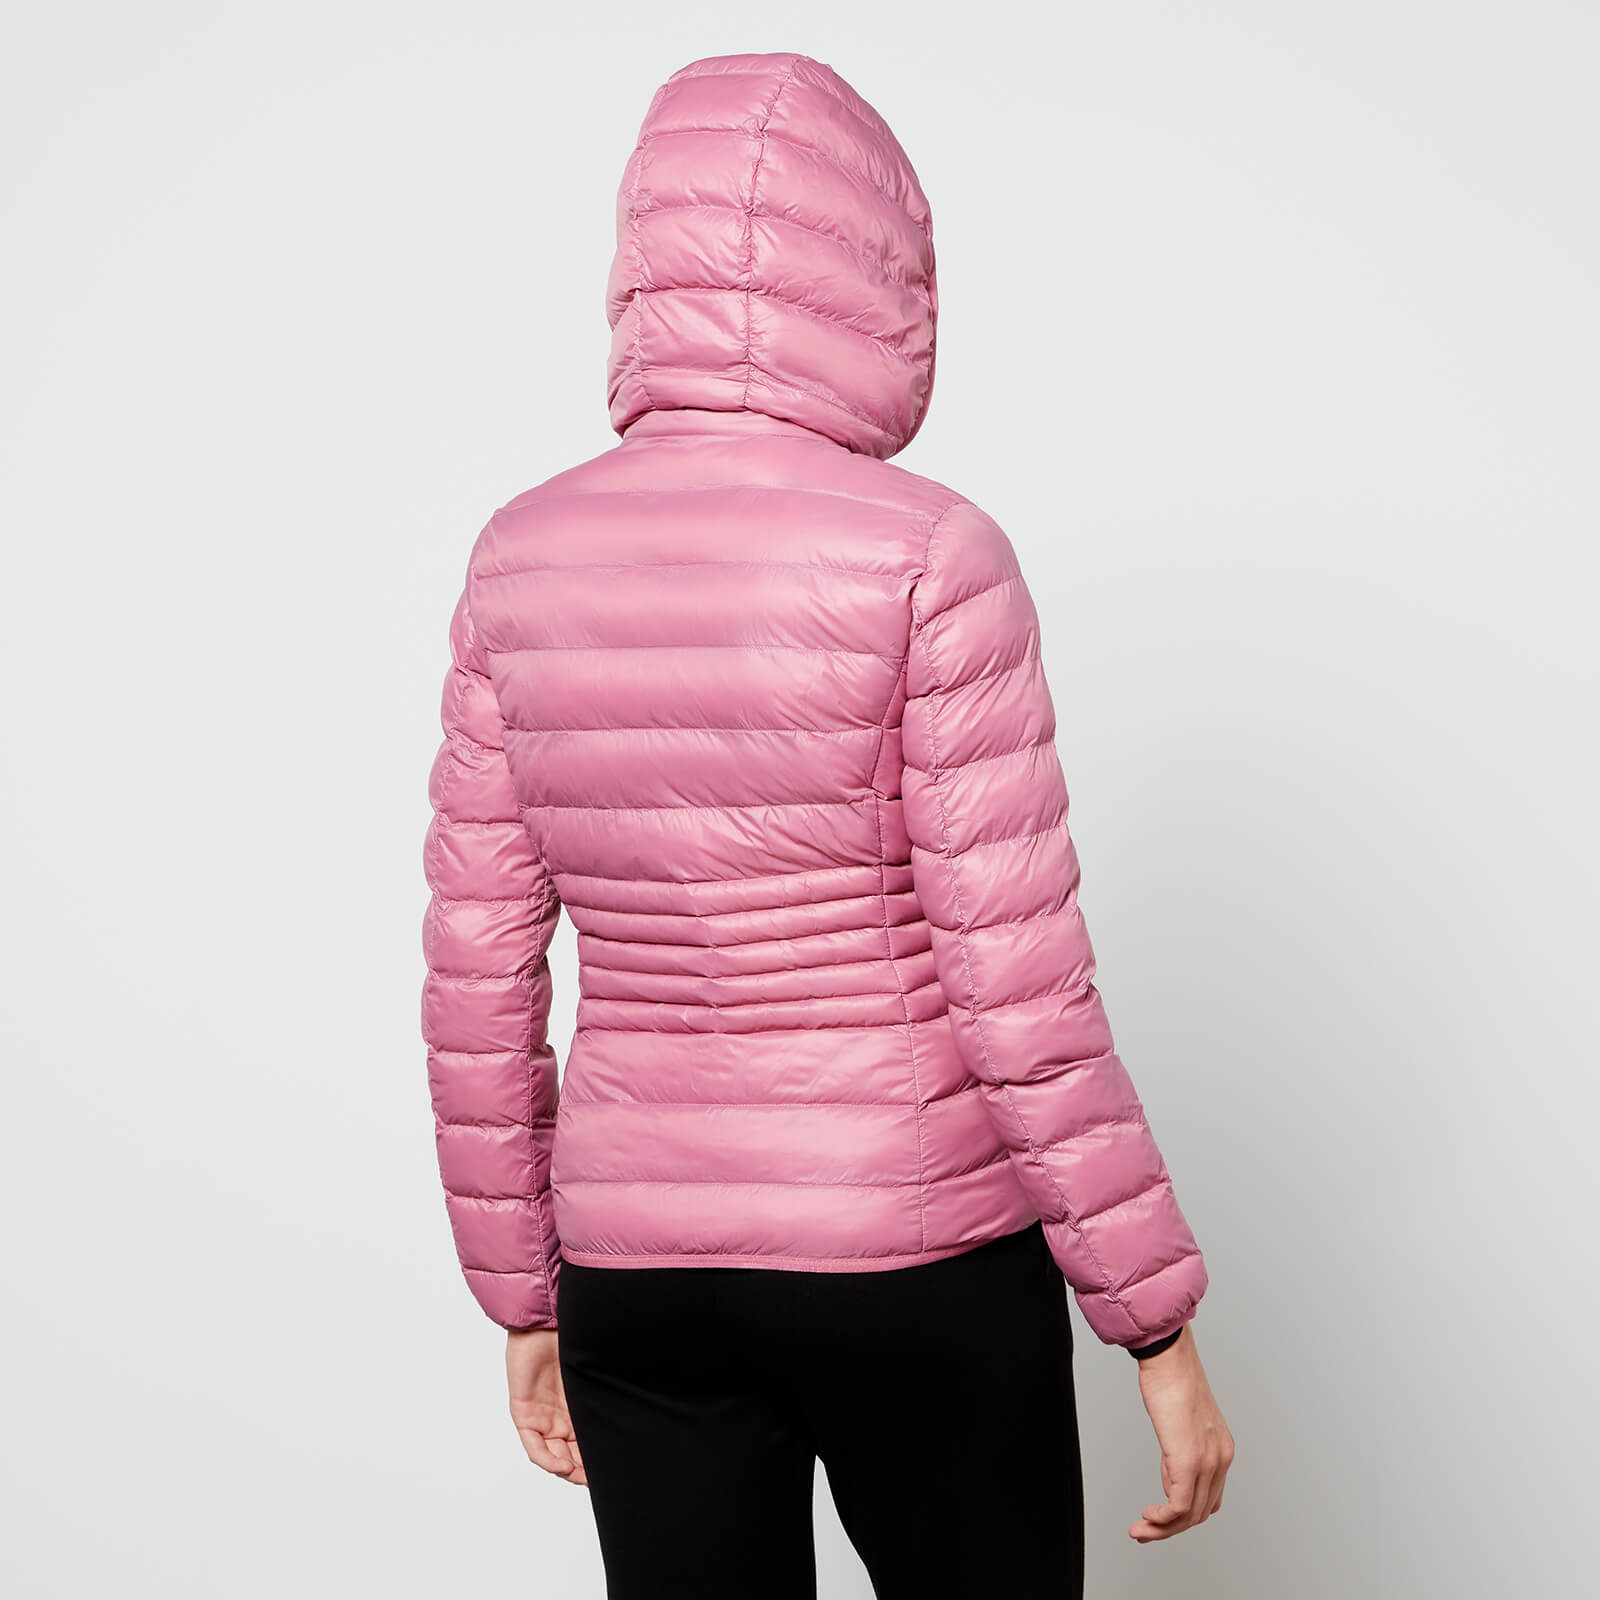 Artikel klicken und genauer betrachten! - Cut from matte pink shell with lightweight insulation, this slim-fitting EA7 puffer jacket is designed as a training layer. Baffle quilted throughout with a narrowed waist, it is equipped with a removable hood and multiple pockets. It is signed off with signature branding at the chest. | im Online Shop kaufen